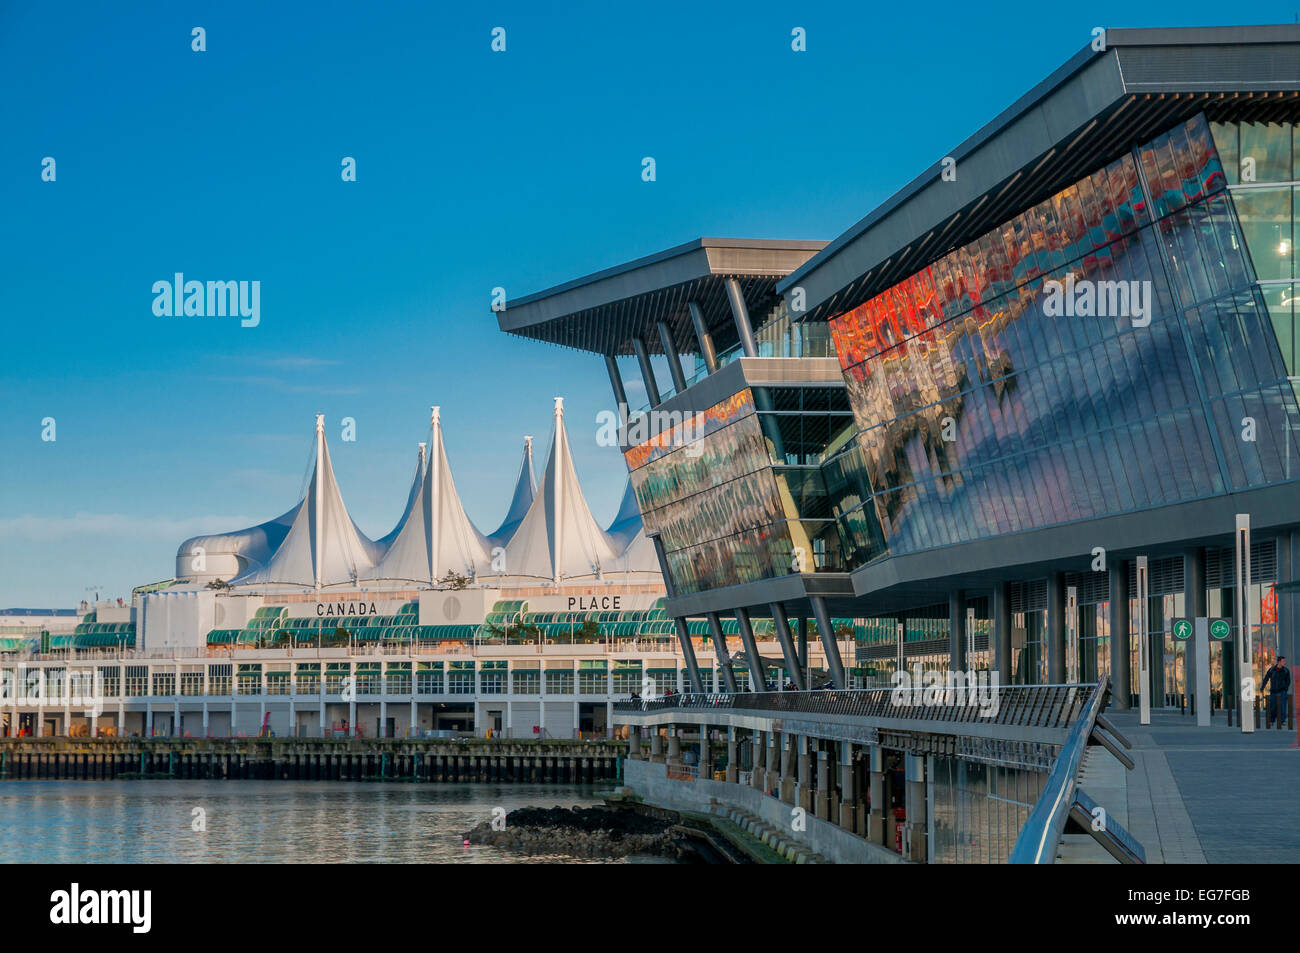 Vancouver's Convention Centres, Canada Place and the Vancouver Convention Centre, Vancouver, British Columbia, Canada Stock Photo